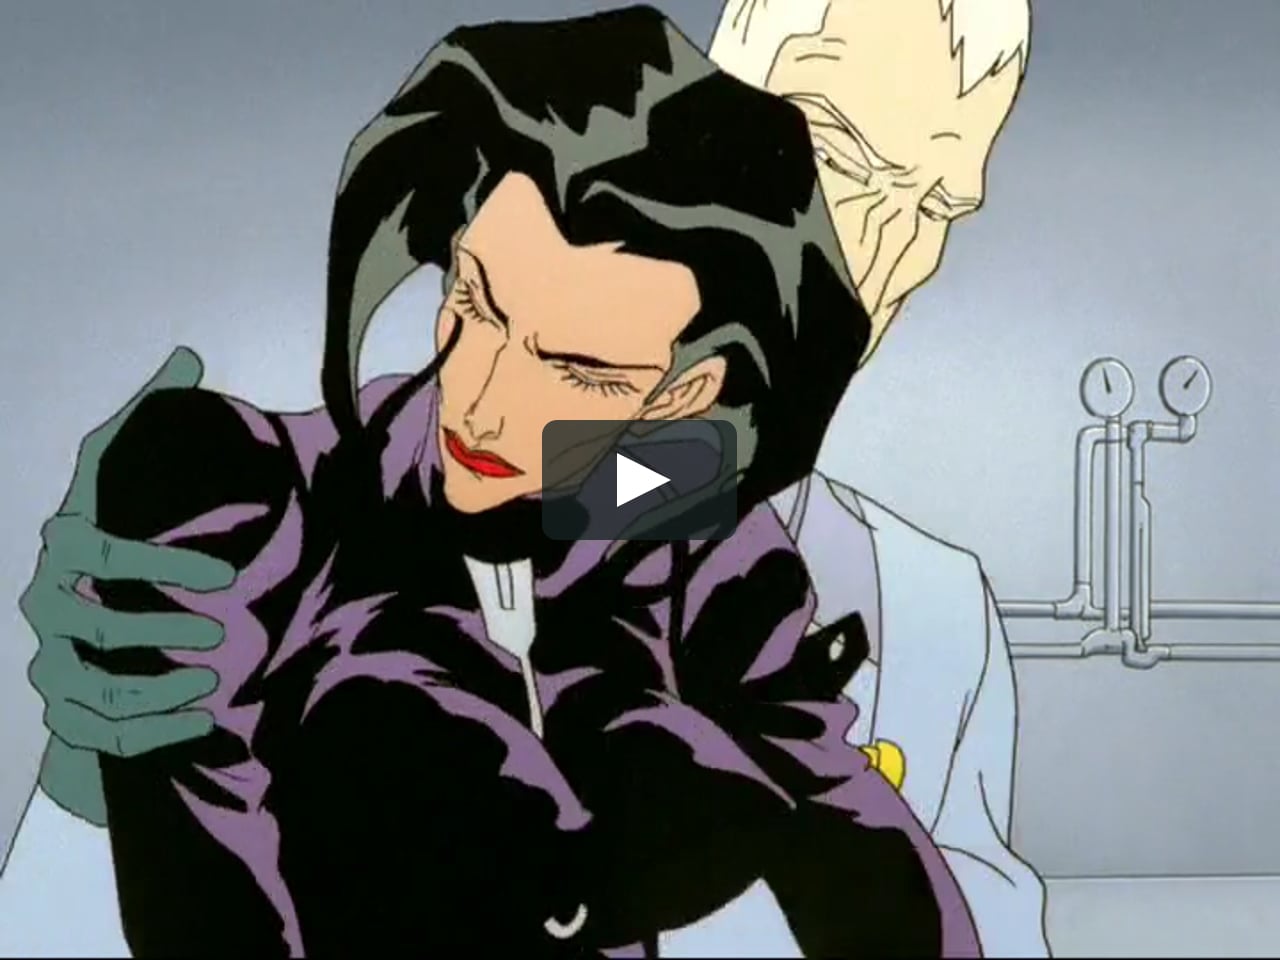 Aeon Flux 1995 S03 E04 A Last Time for Everything on Vimeo